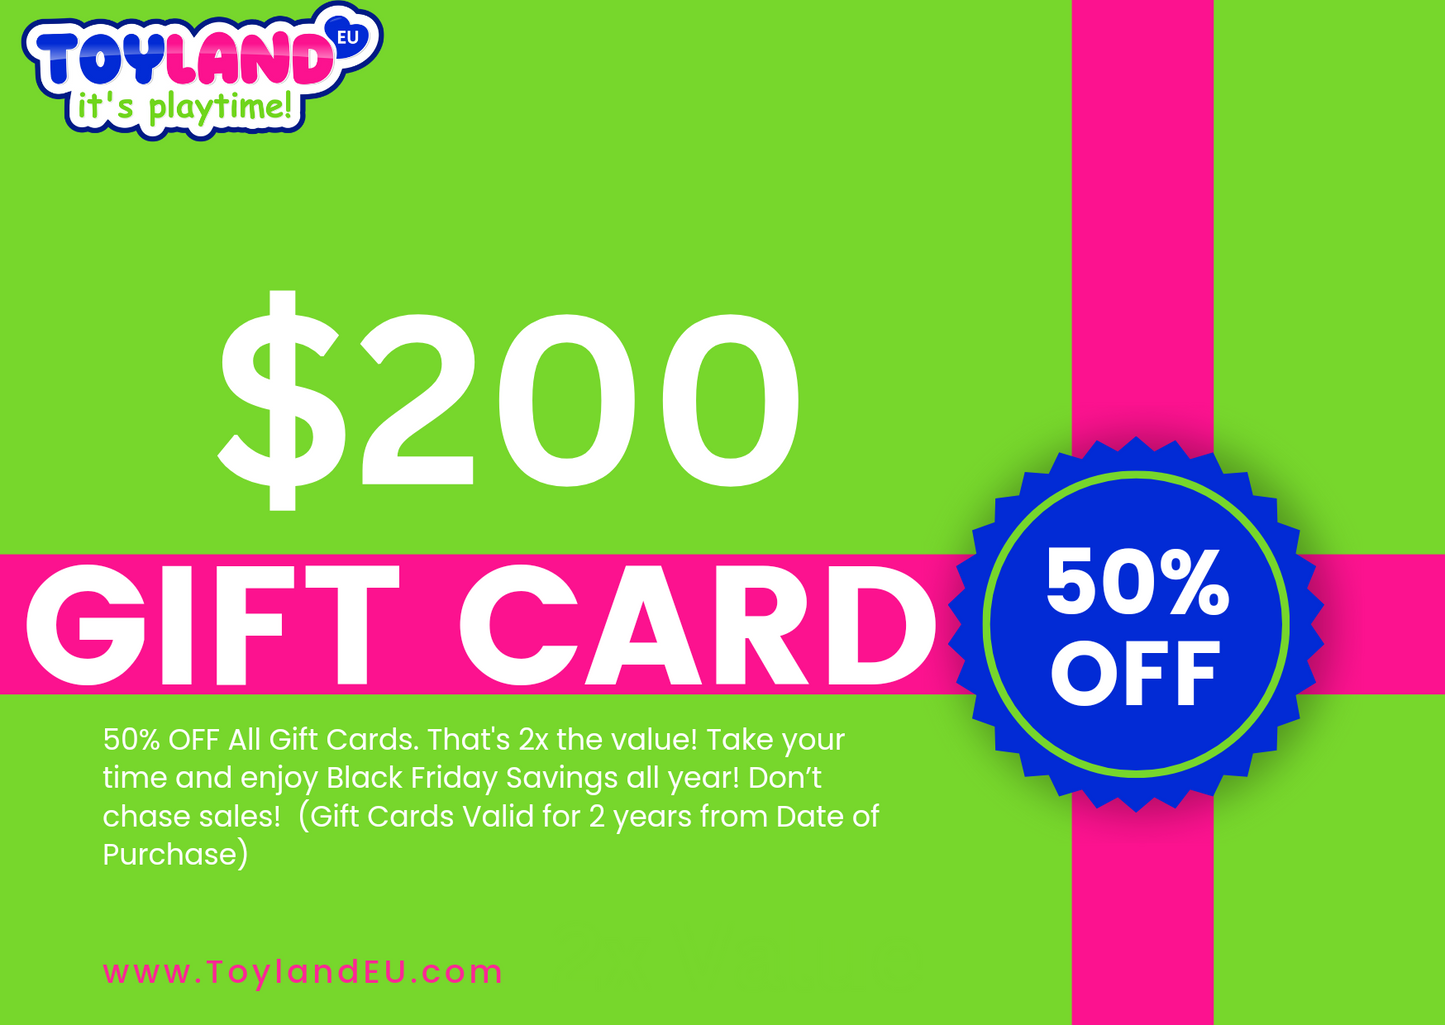 50% Off Gift Cards! Limited Time Only. Discount applied at Checkout Toyland EU